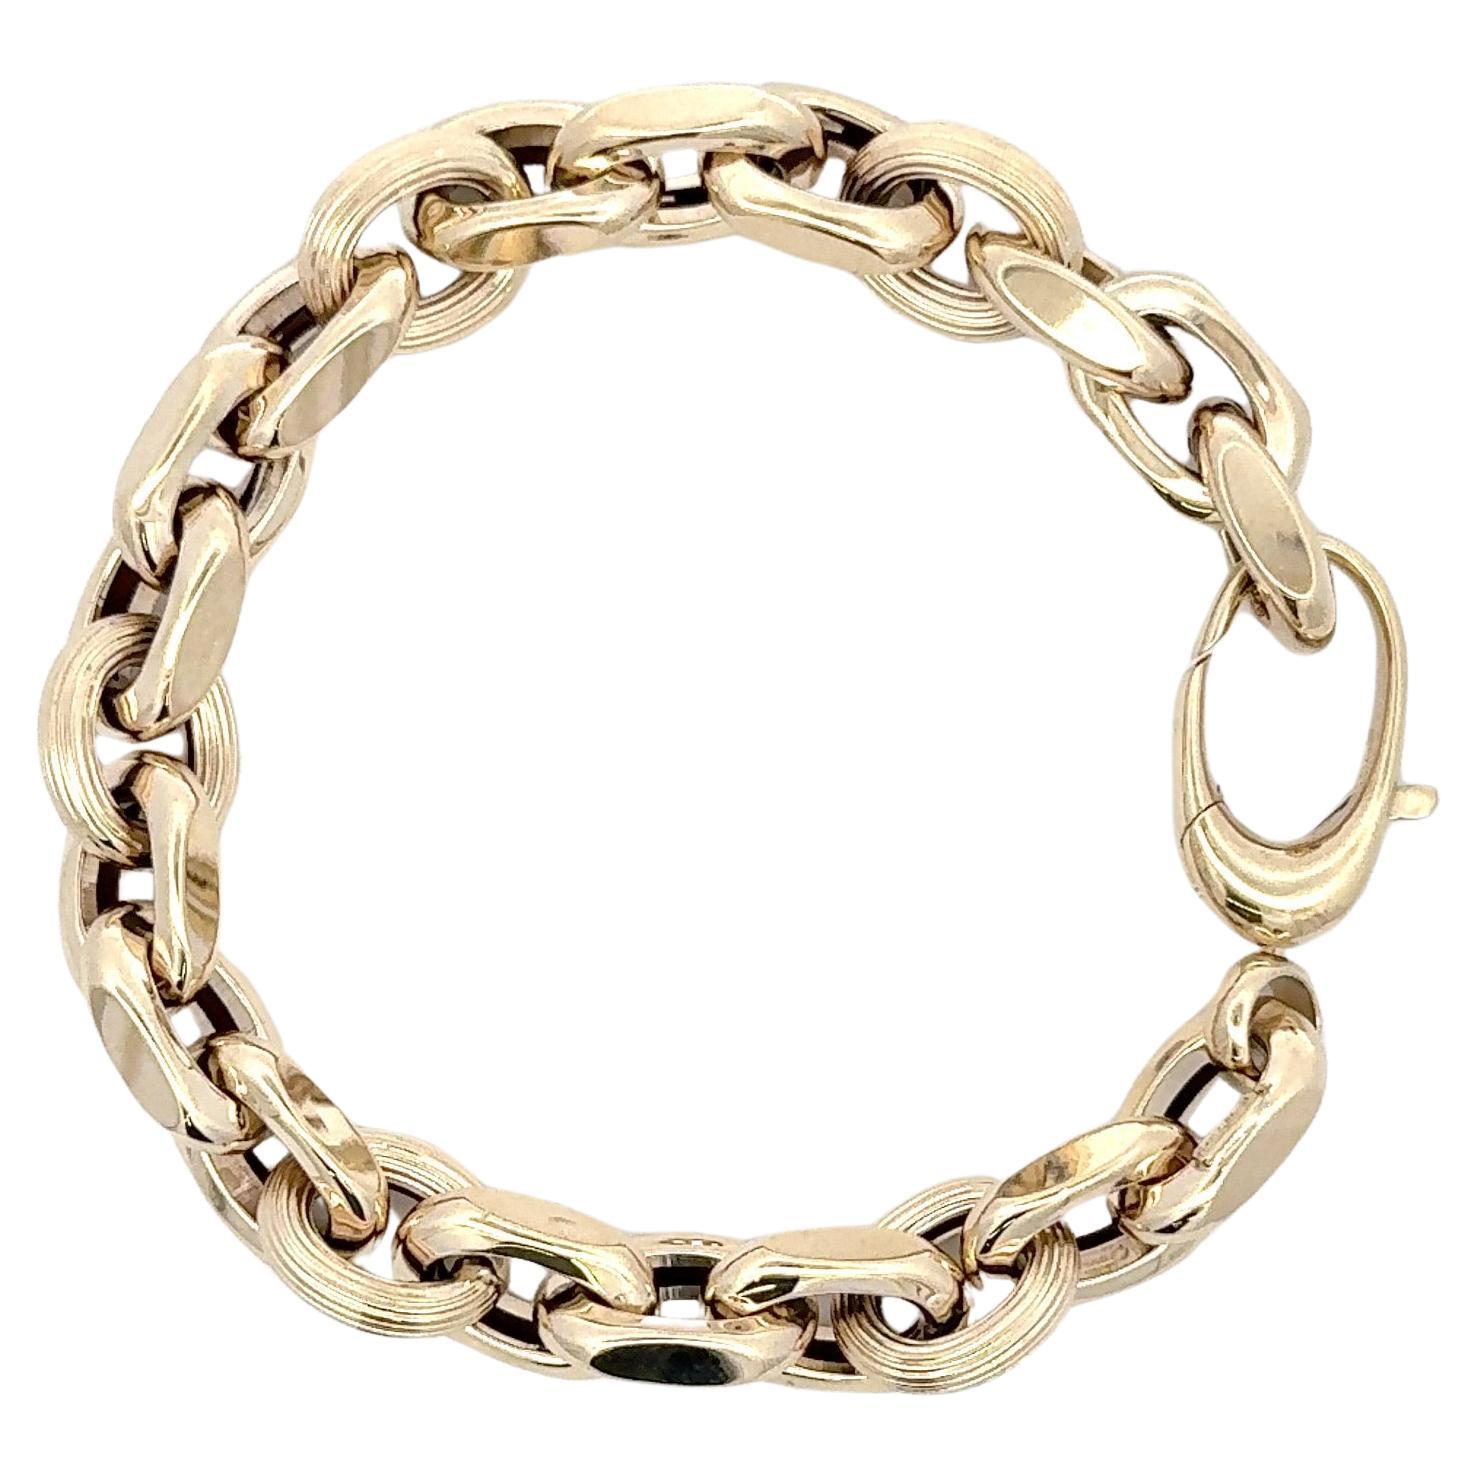 Made in Italy, this 14 karat yellow gold bracelet features oval shape textured & high polished links weighing 11.4 grams.